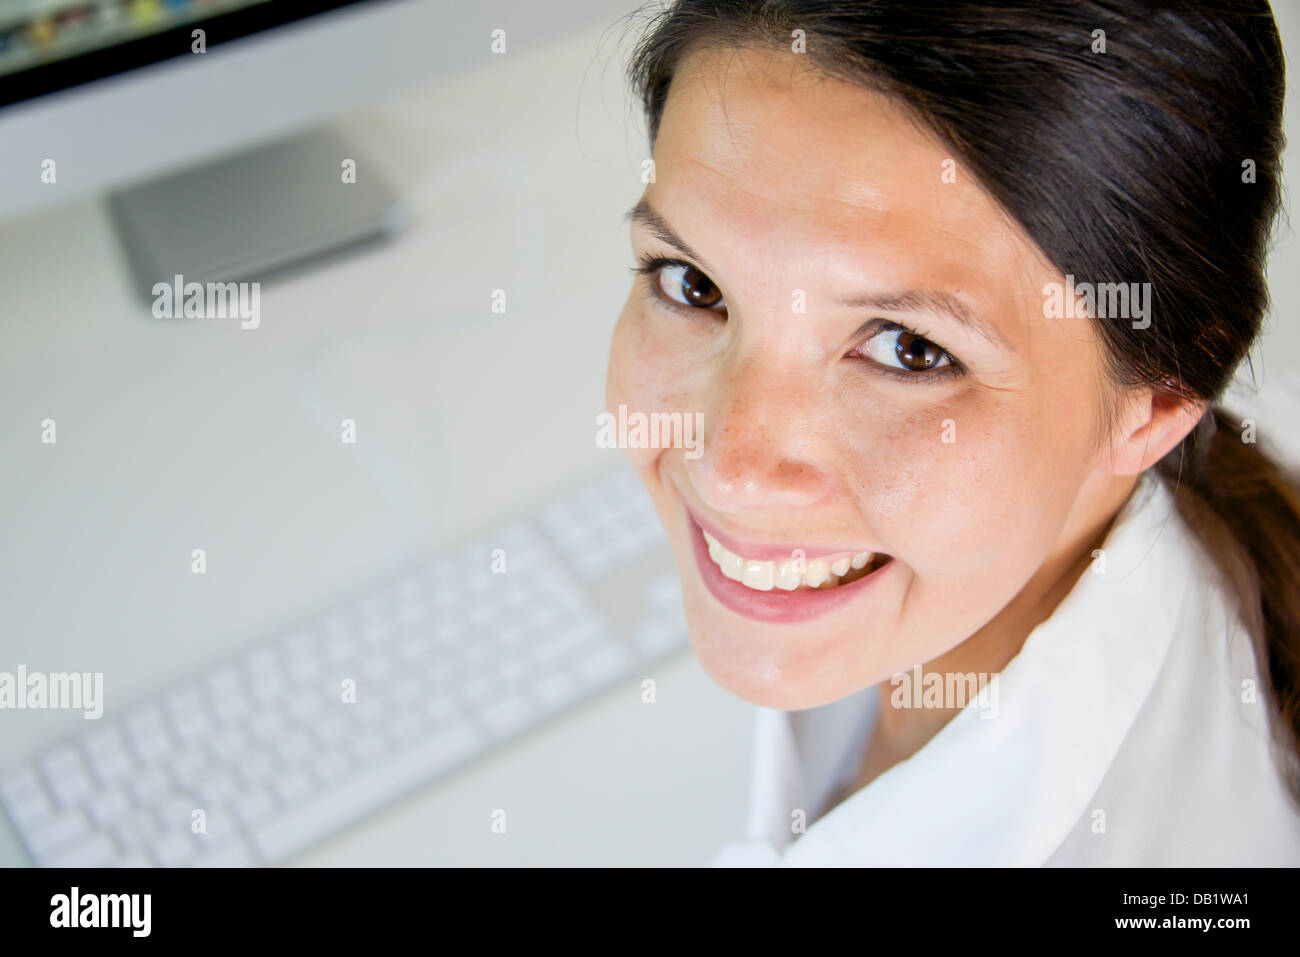 woman sitting at working desk is smiling Stock Photo